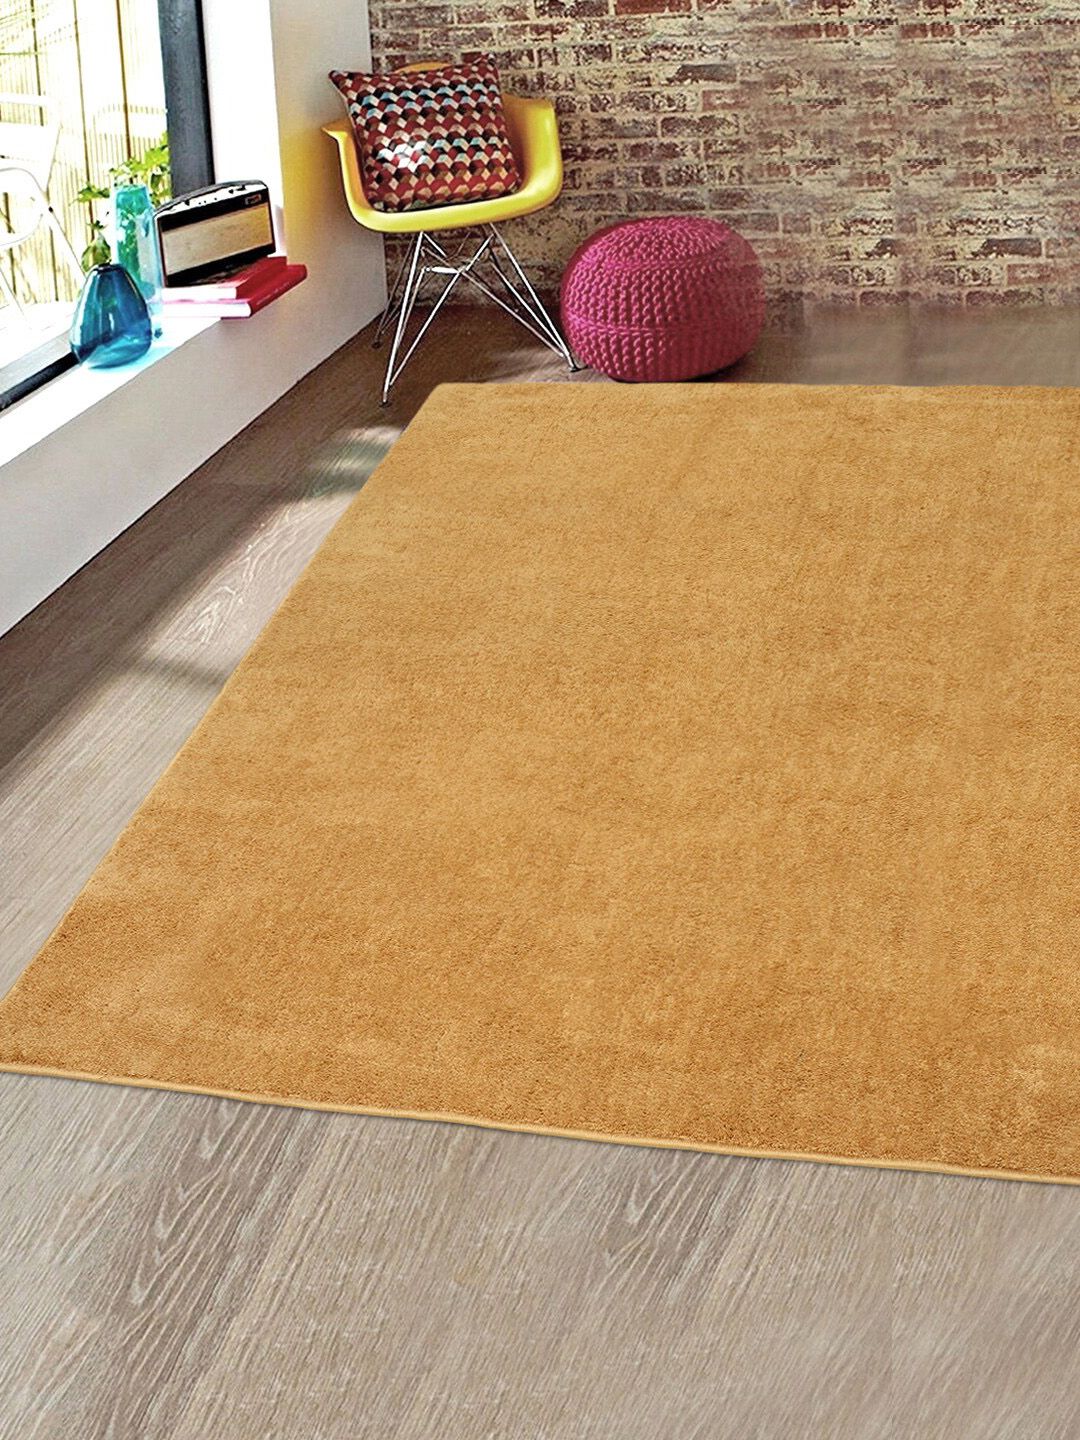 Saral Home Gold-Coloured Solid Cotton Shaggy Anti-Skid Carpet Price in India